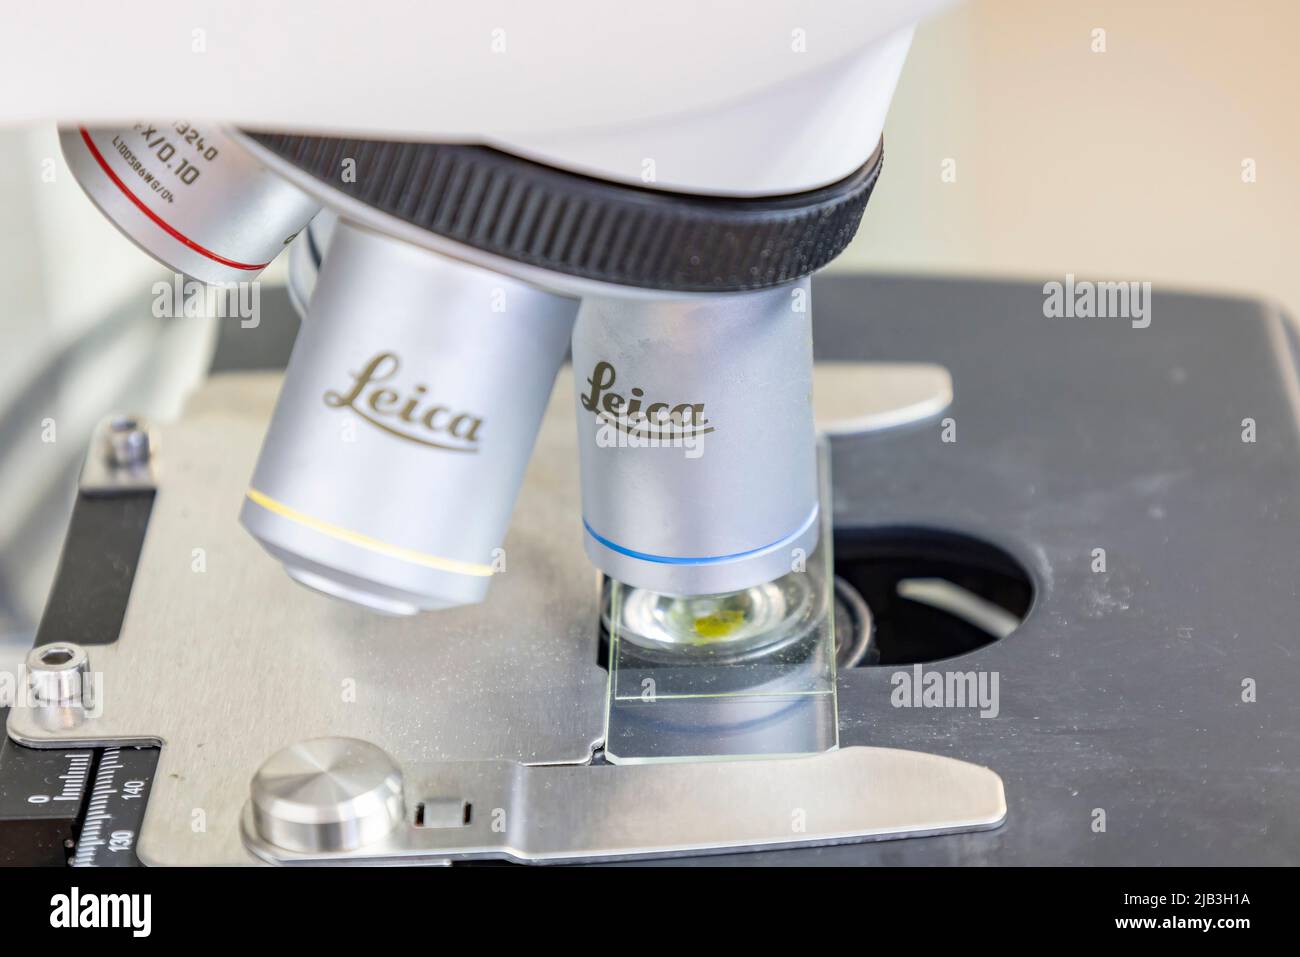 Huelva, Spain - April 28, 2022: Detail of a microscope from Leica Microsystems GmbH, a German manufacturing of optical microscopes Stock Photo